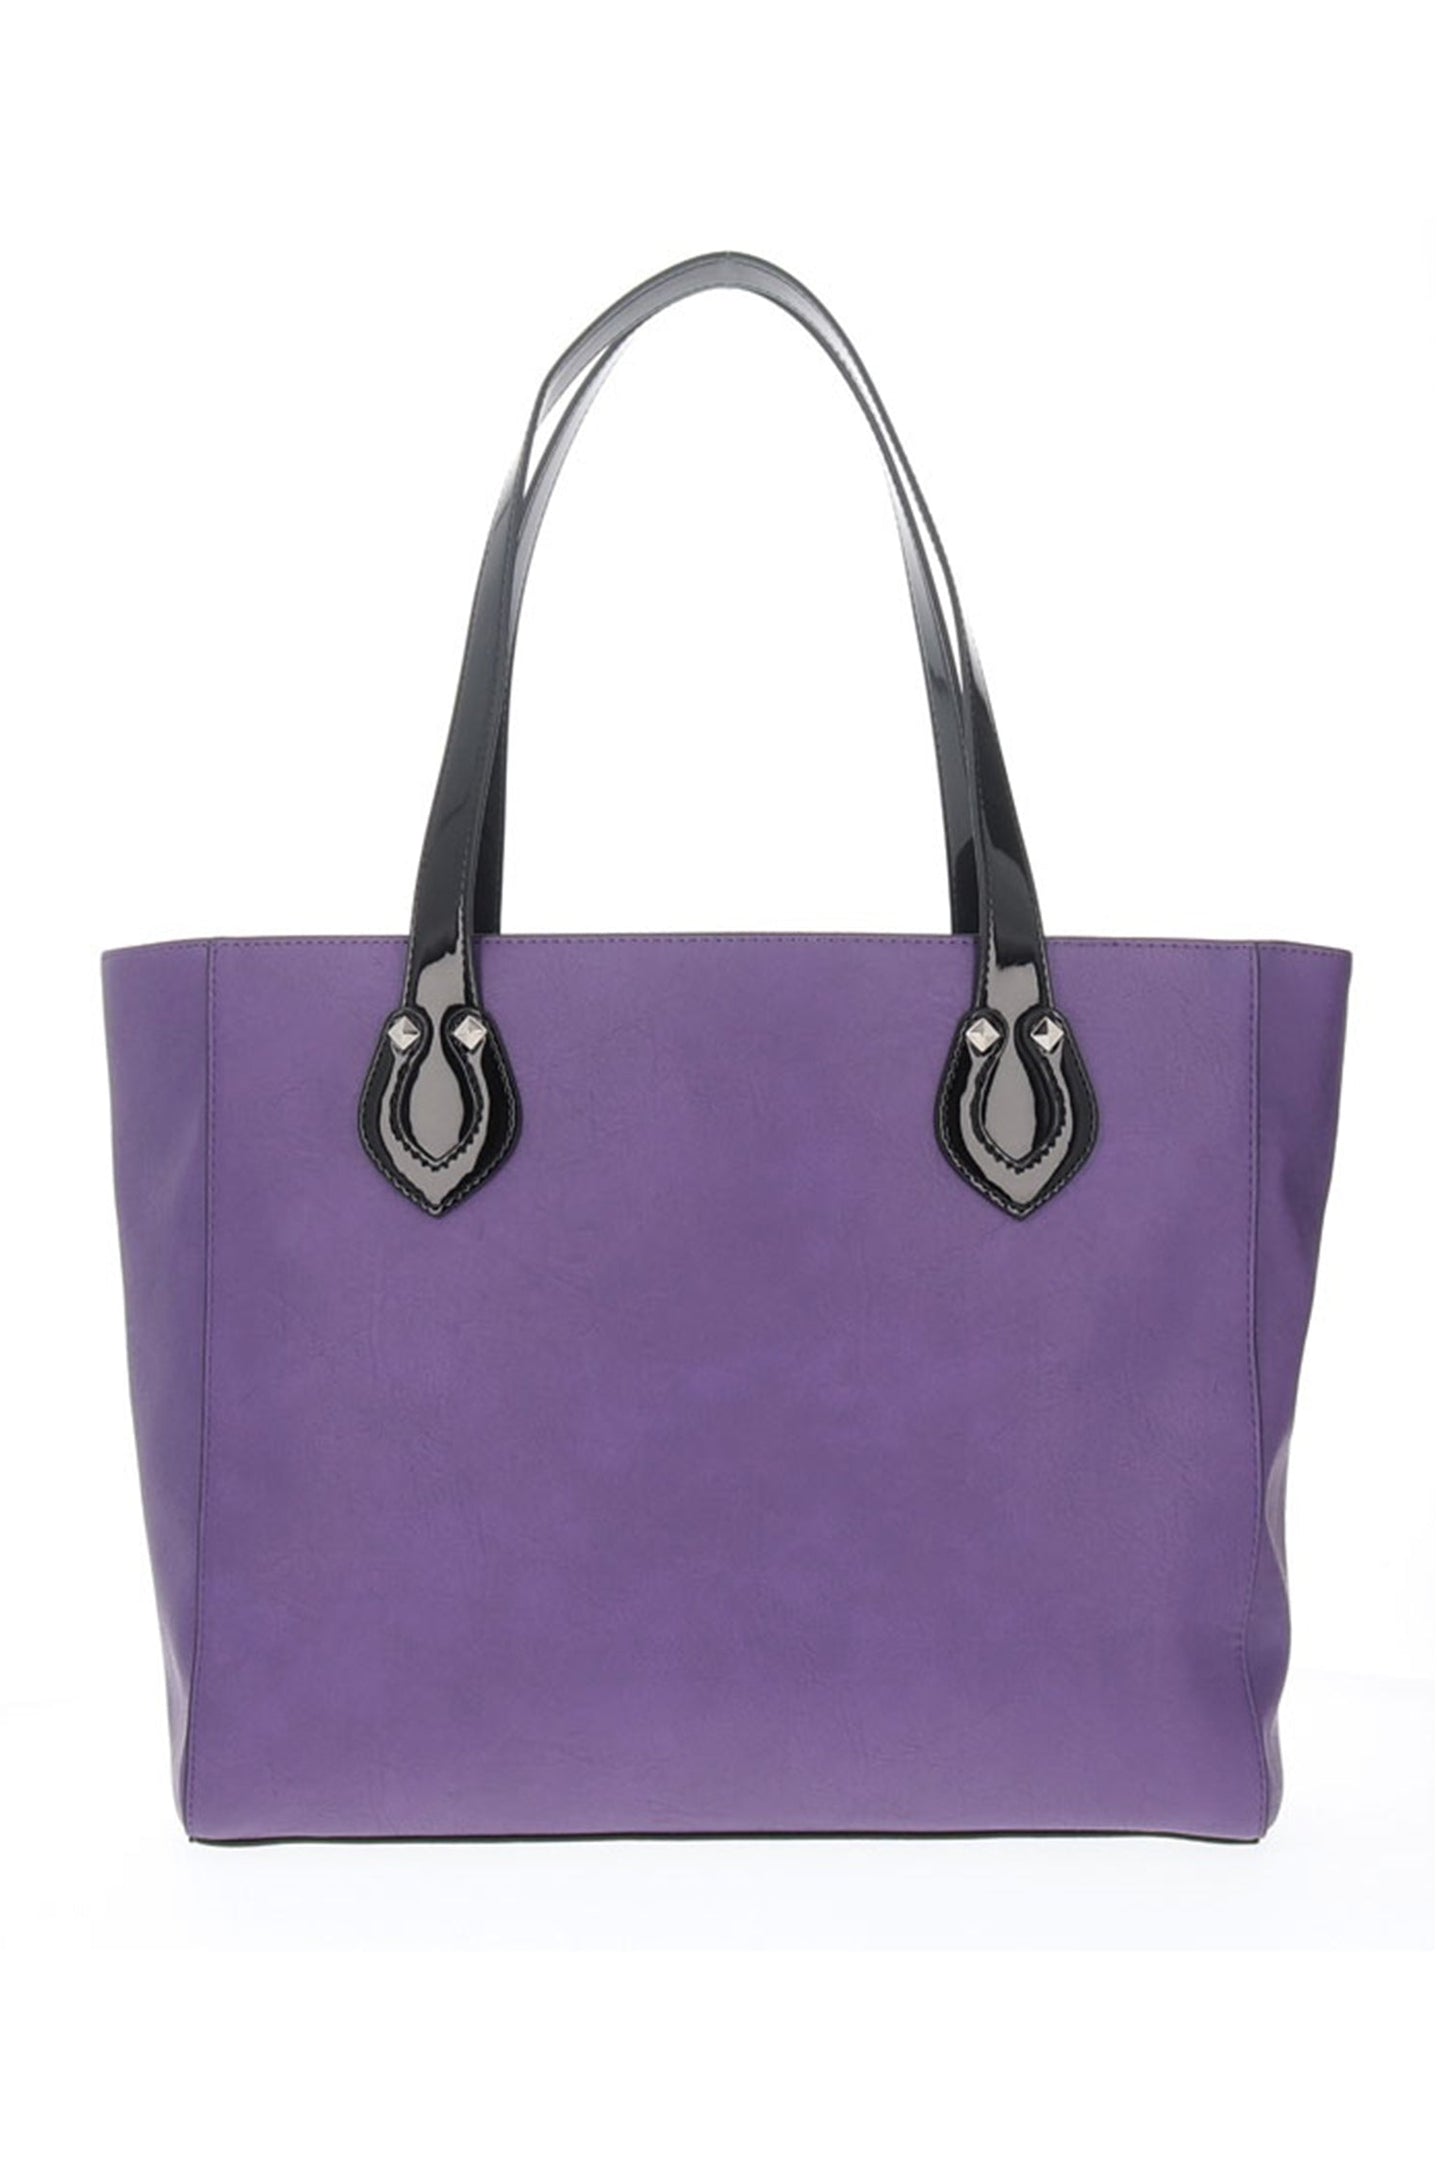 On the other side, Metallica Large Tote Bag is Purple, 2 handles attach in a horseshoe like shape